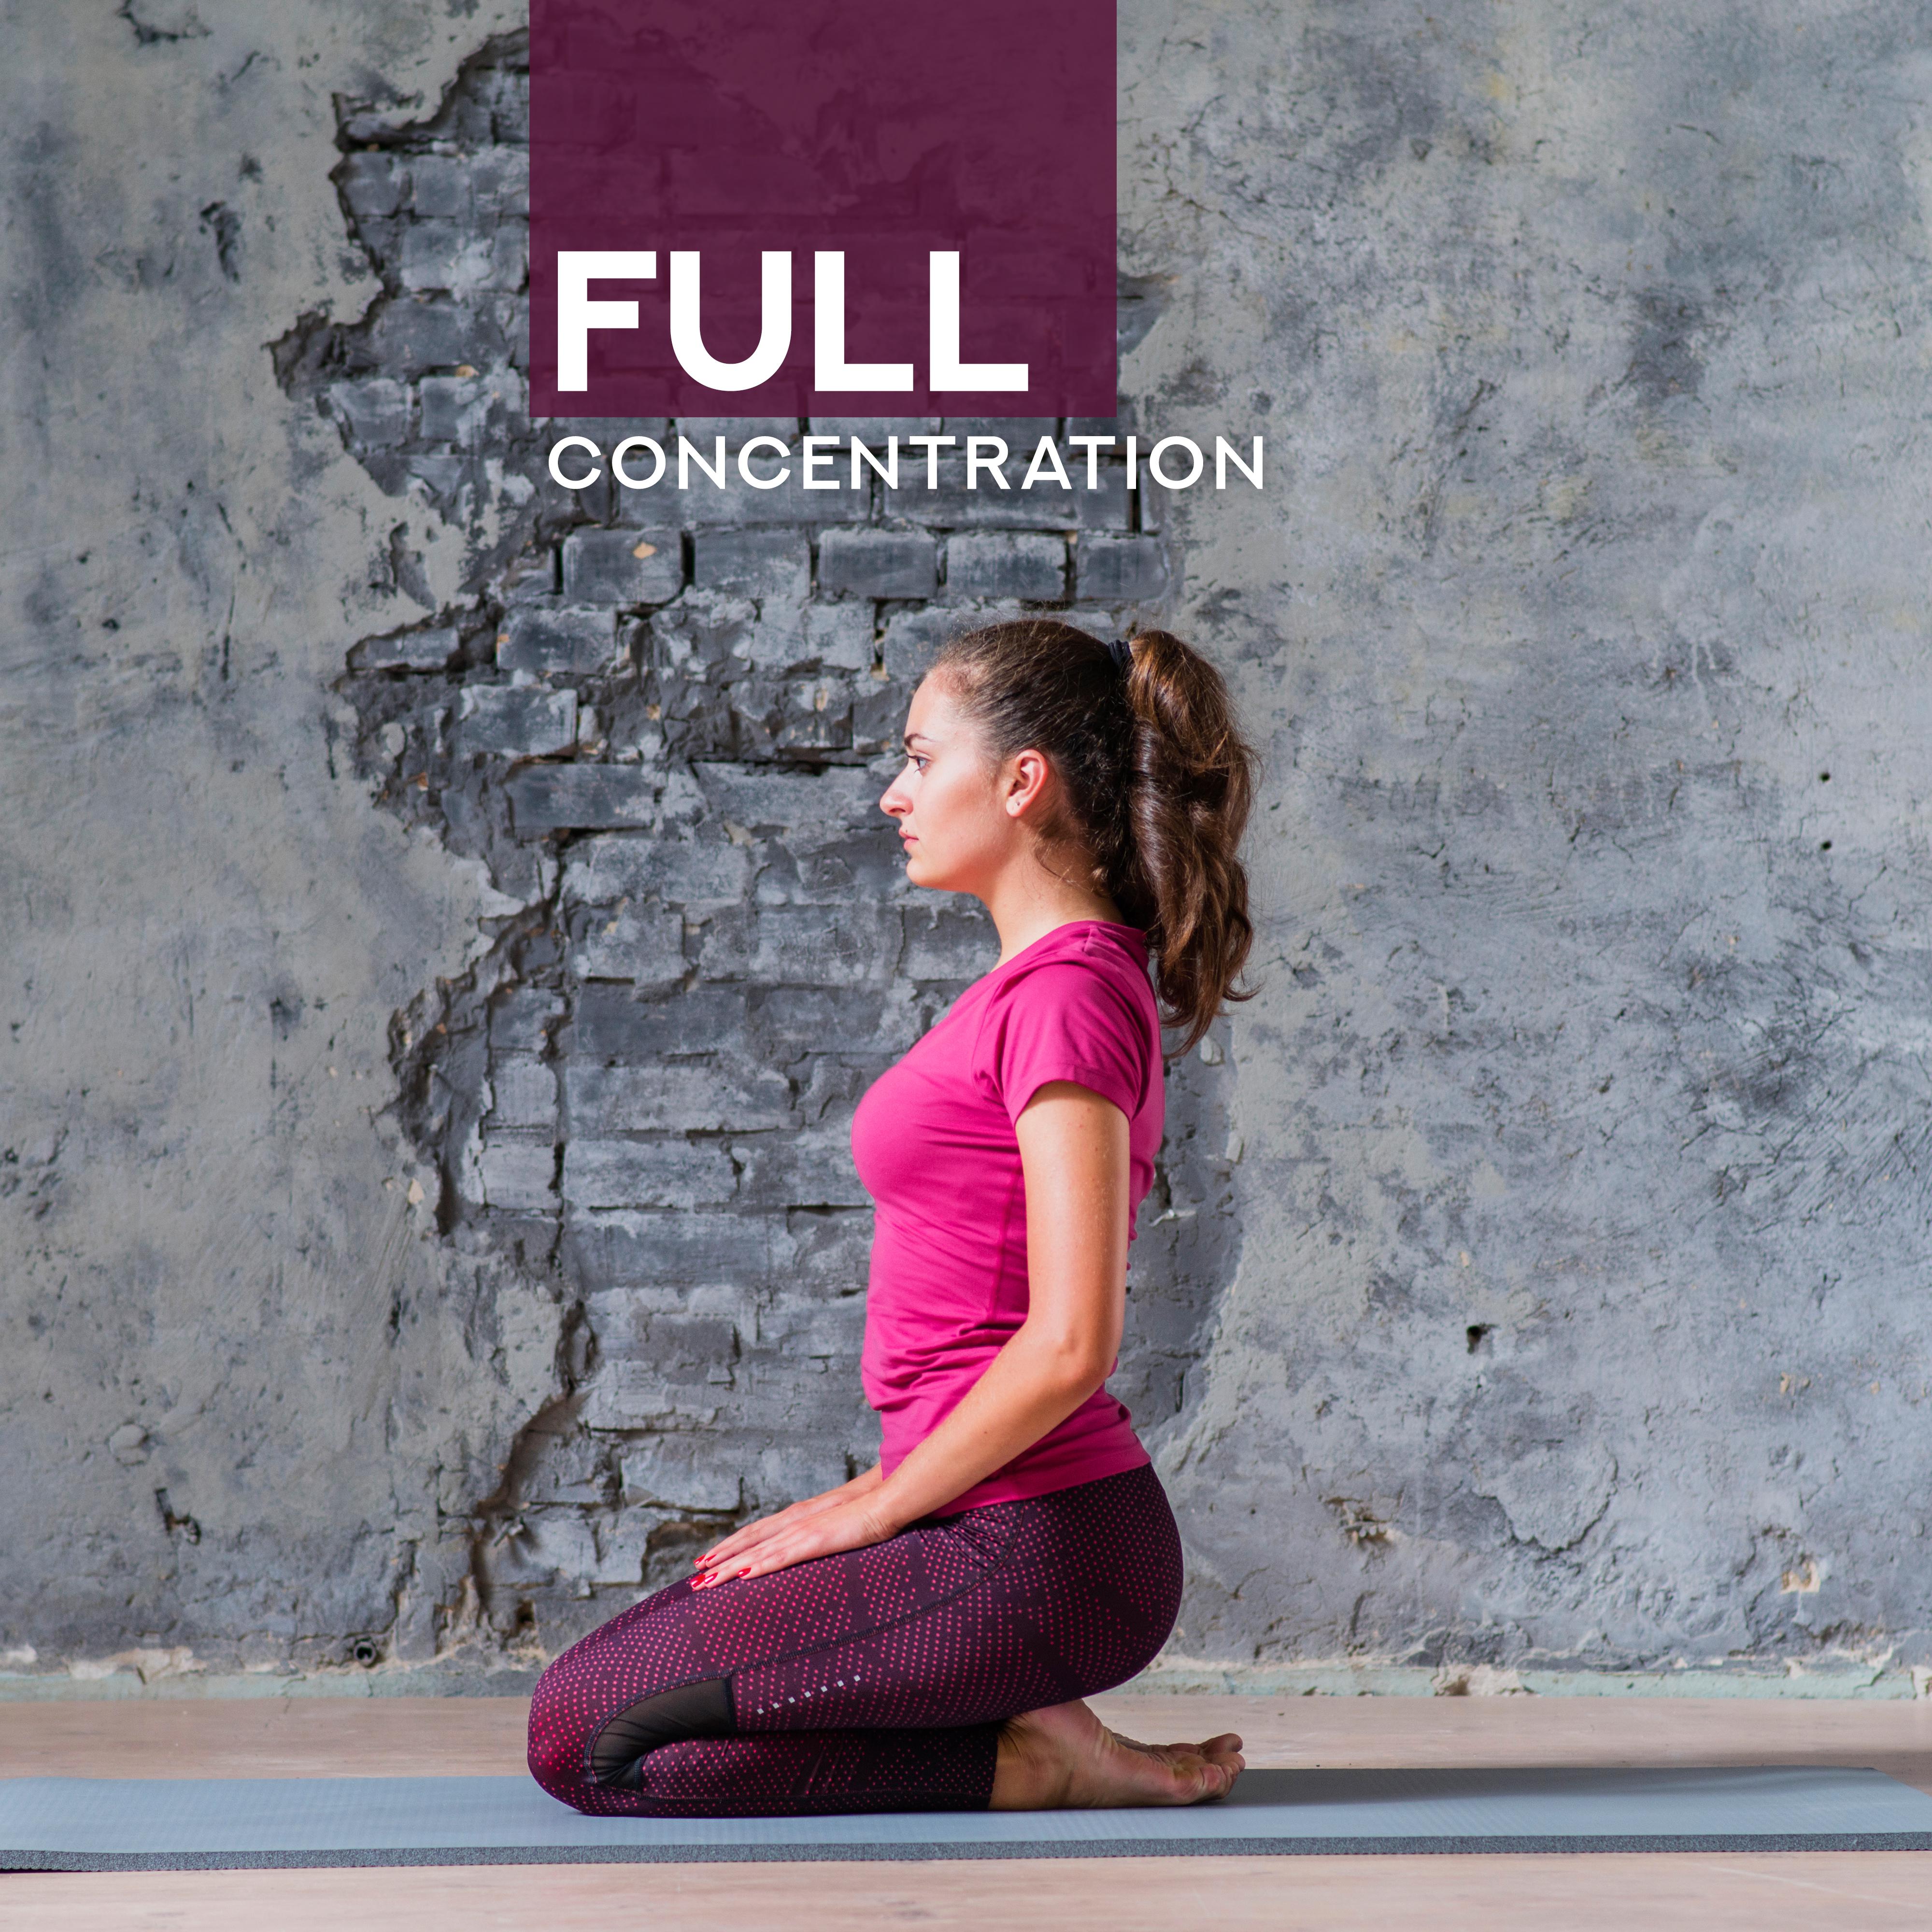 Full Concentration – Meditation Music Zone, Yoga Relaxations, Stress Relief, Inner Harmony, Relaxing Music for Blissful Yoga, Pure Meditation, Zen Vibrations